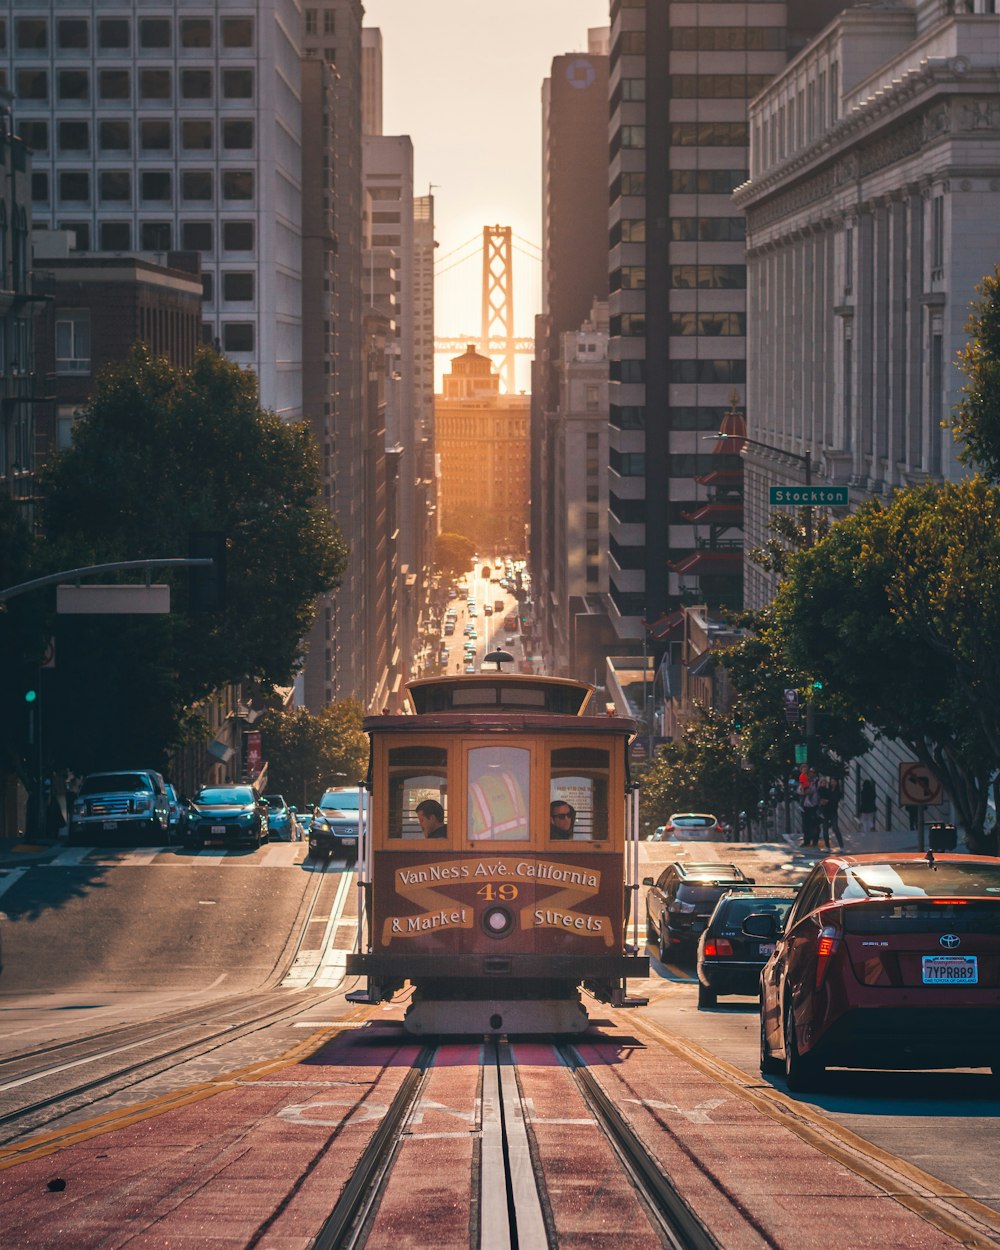 Mornings In Sf Photo By Amogh Manjunath At Therealamogh On Unsplash